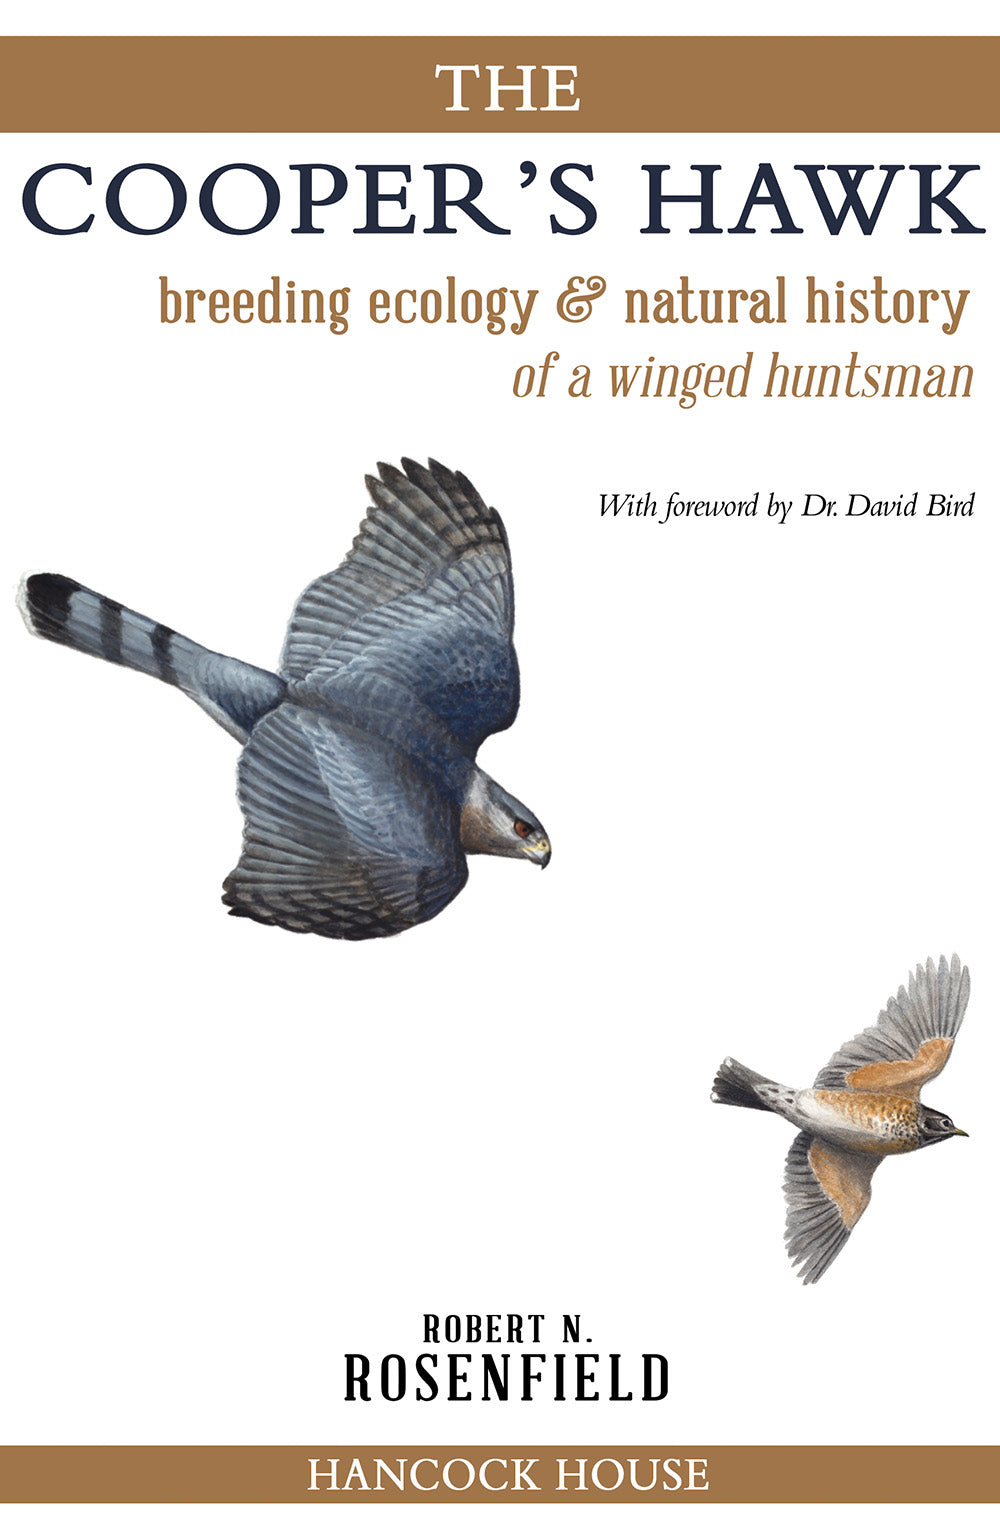 The Cooper's Hawk: breeding ecology & natural history of a winged huntsman